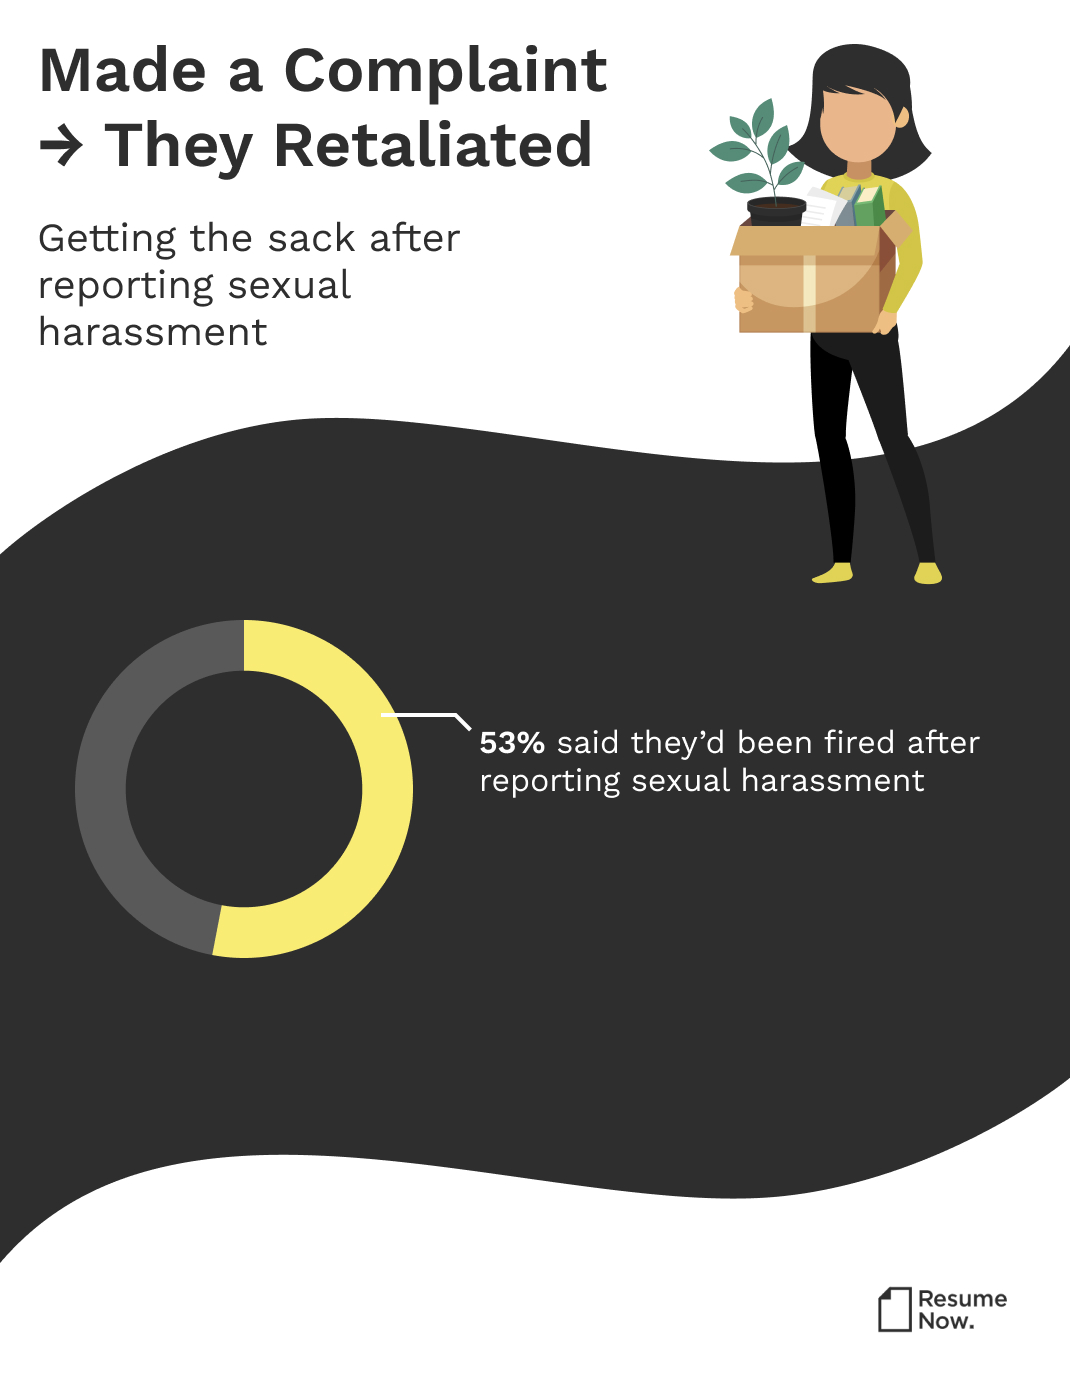 Resume Now looks at the outcome of sexual harassment complaints on victims in the workplace, according to research